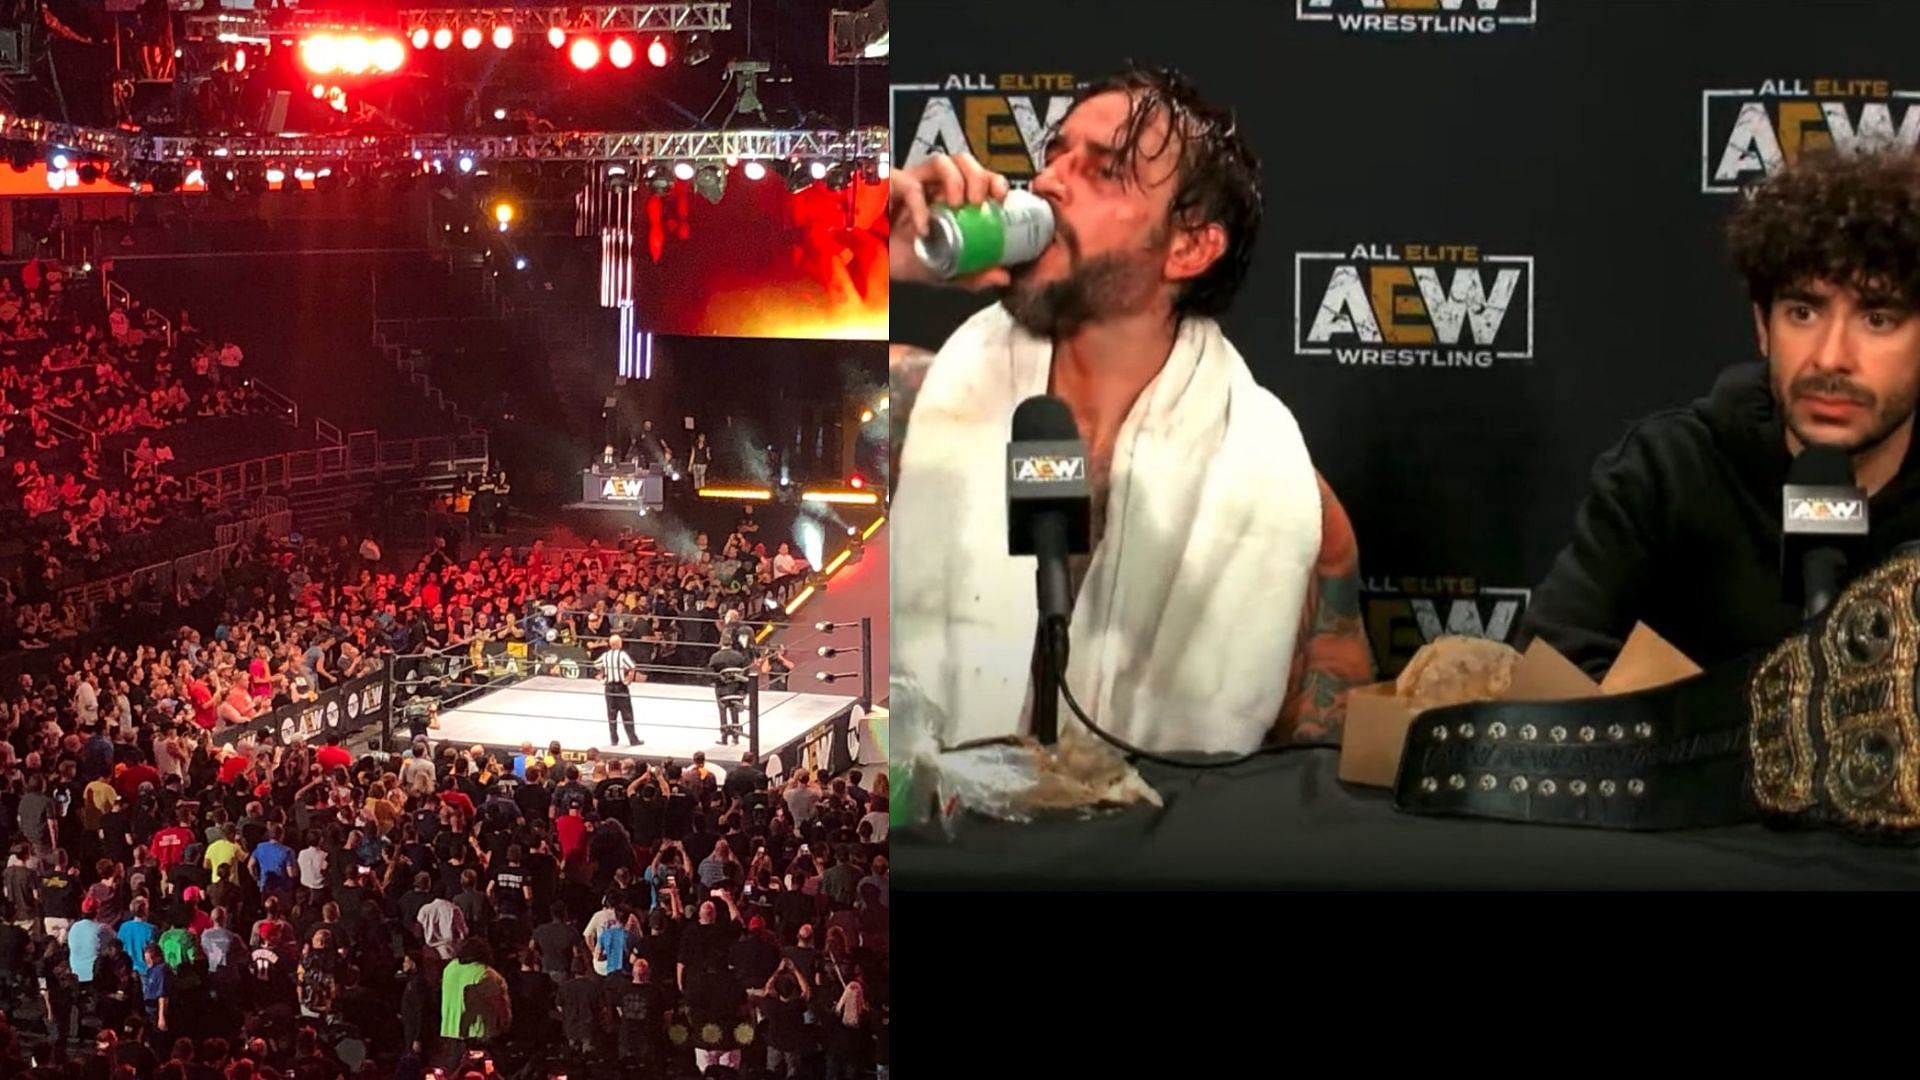 [WATCH] Tony Khan garners a hostile crowd reaction from Chicago before AEW Collision